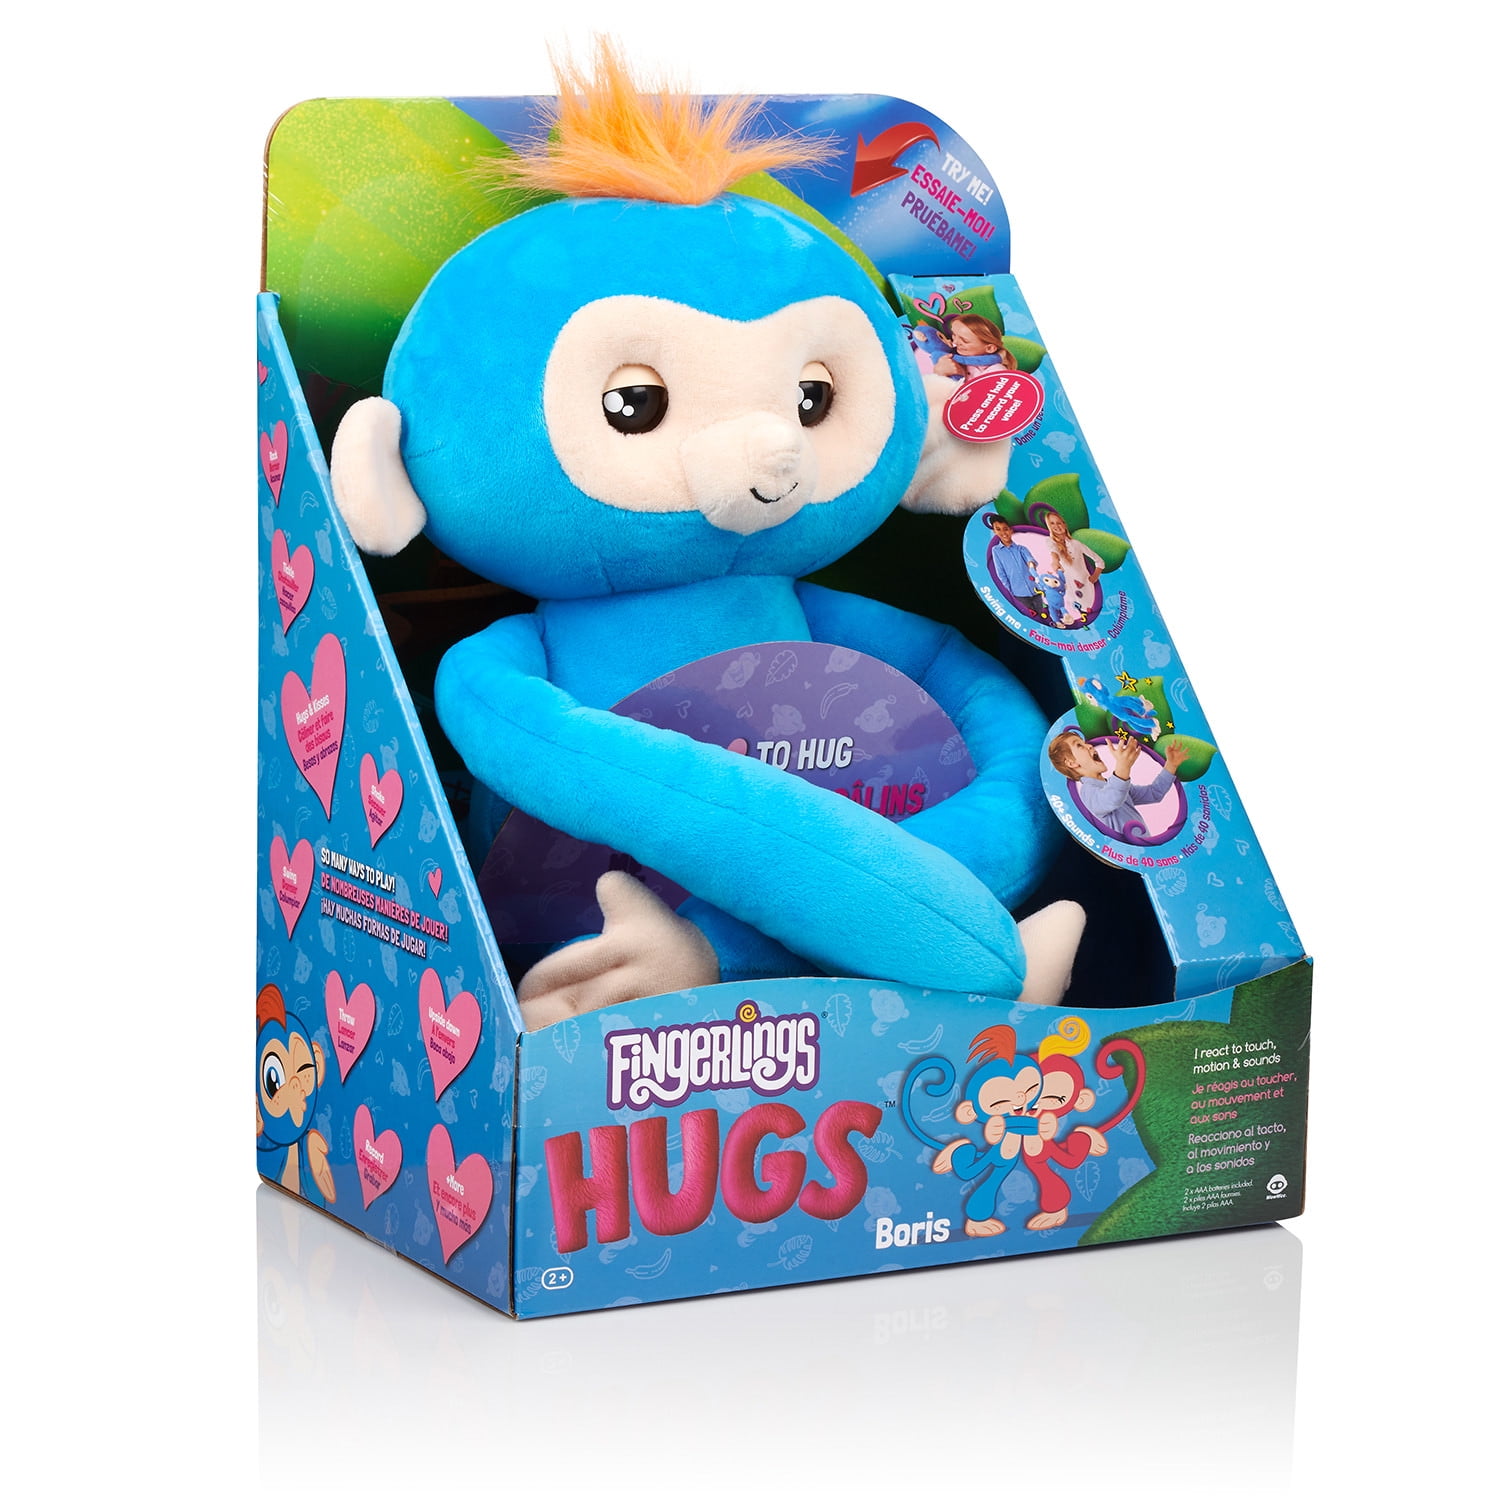 BRAND NEW FINGLERLINGS HUGS BELLA AND BORIS PINK AND BLUE COLLECTIBLE PLUSH 14 